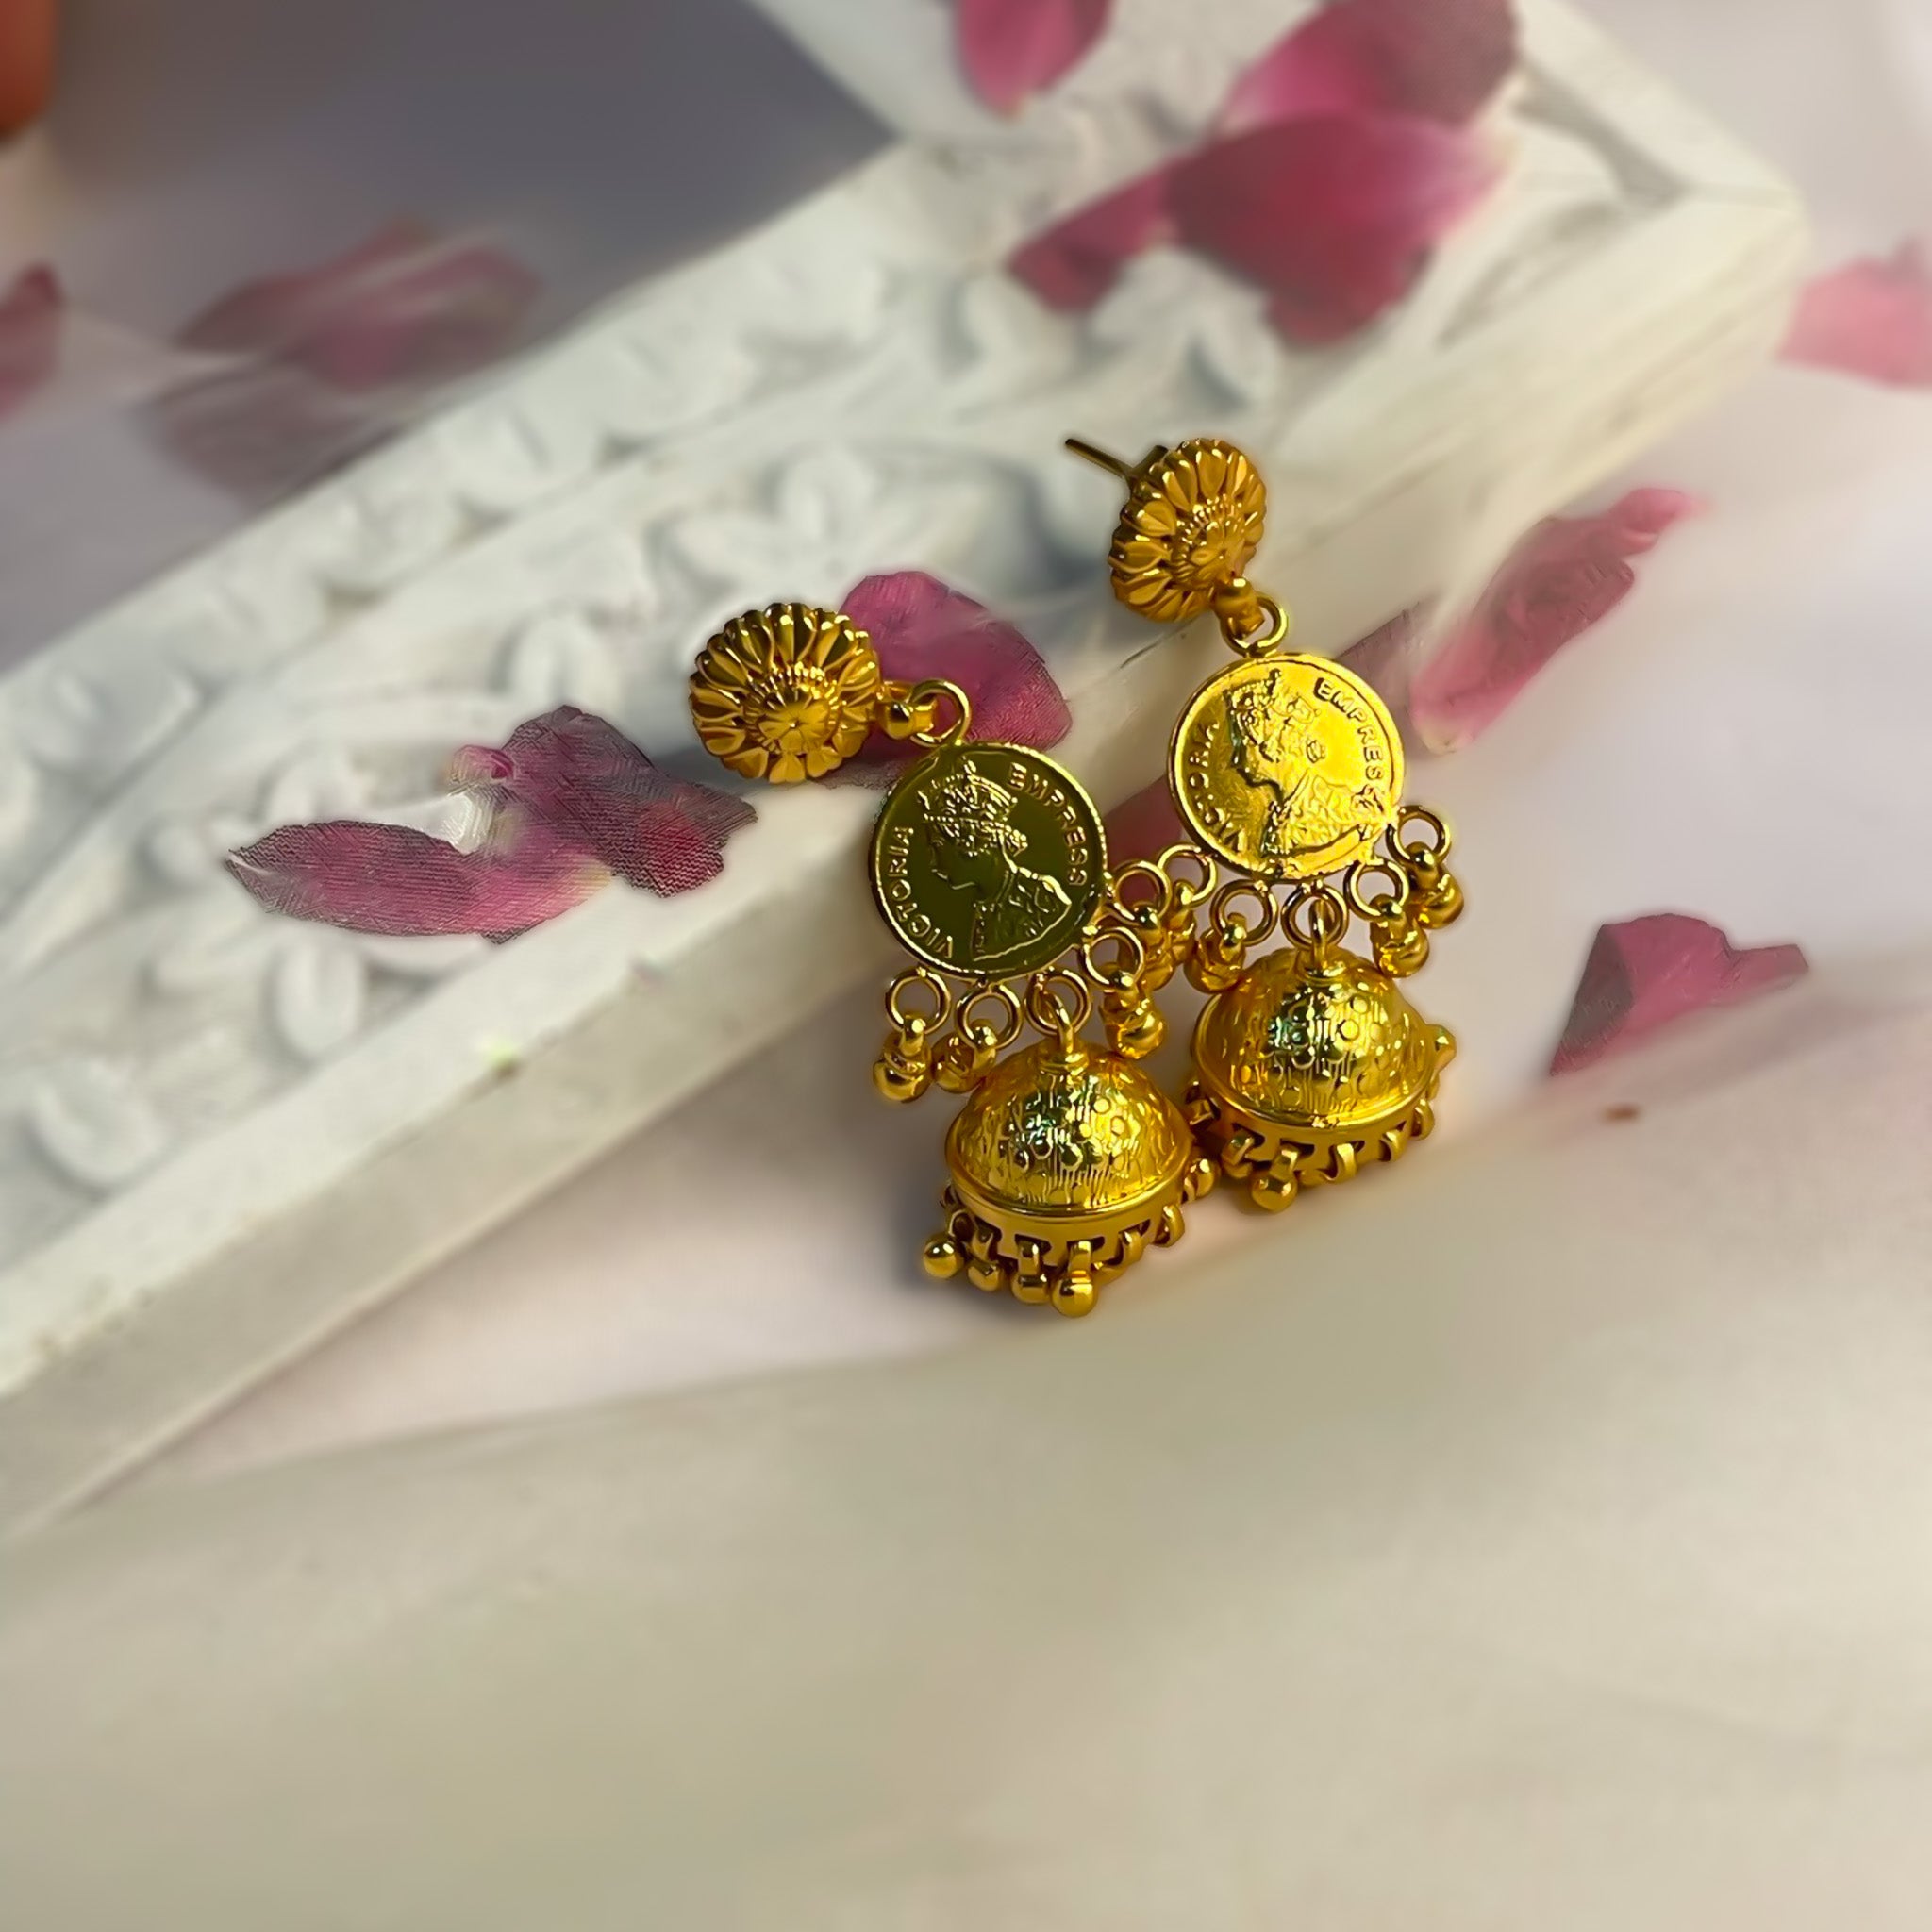 30 gold earrings designs with weight and price  22k gold south indian  EARRINGS collection  YouTube